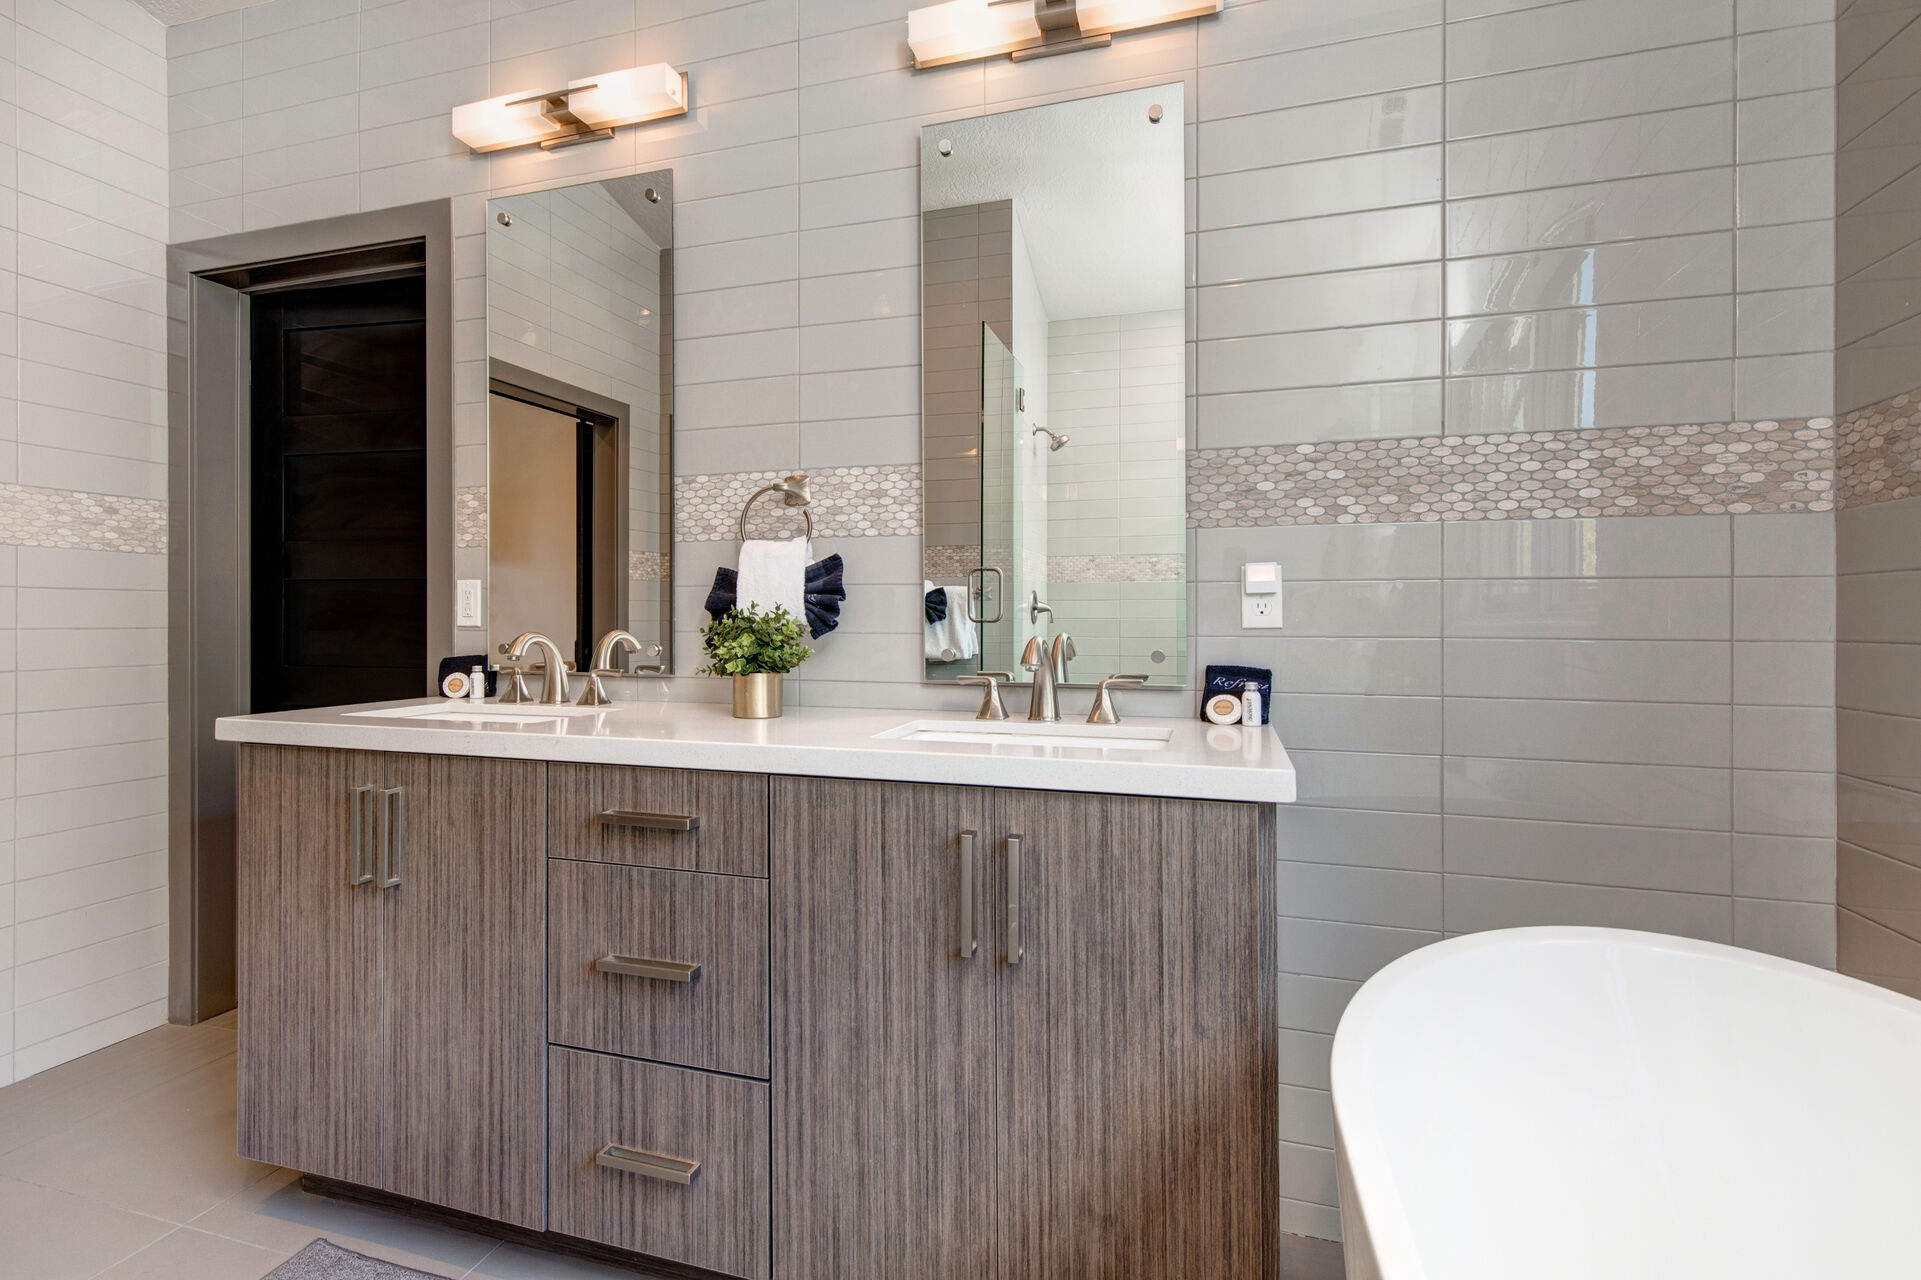 Master Bathroom with dual vanities, soaking tub, and oversized tile and glass shower